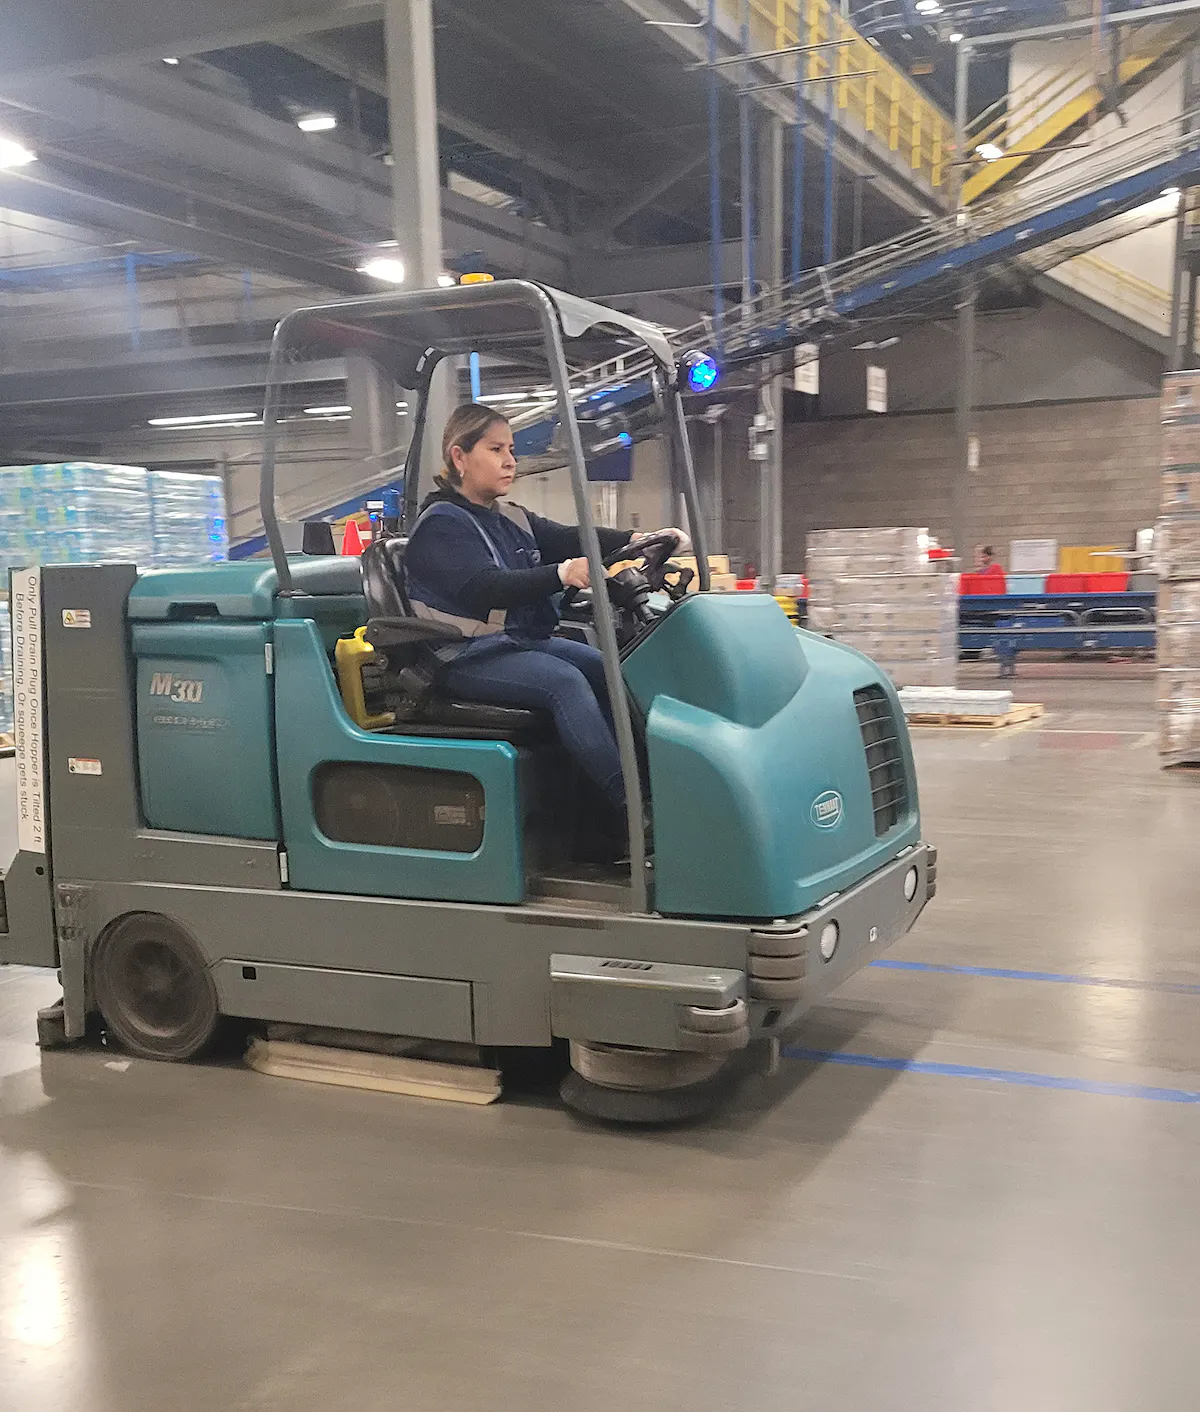 KBS crew member operates cleaning machinery in a warehouse